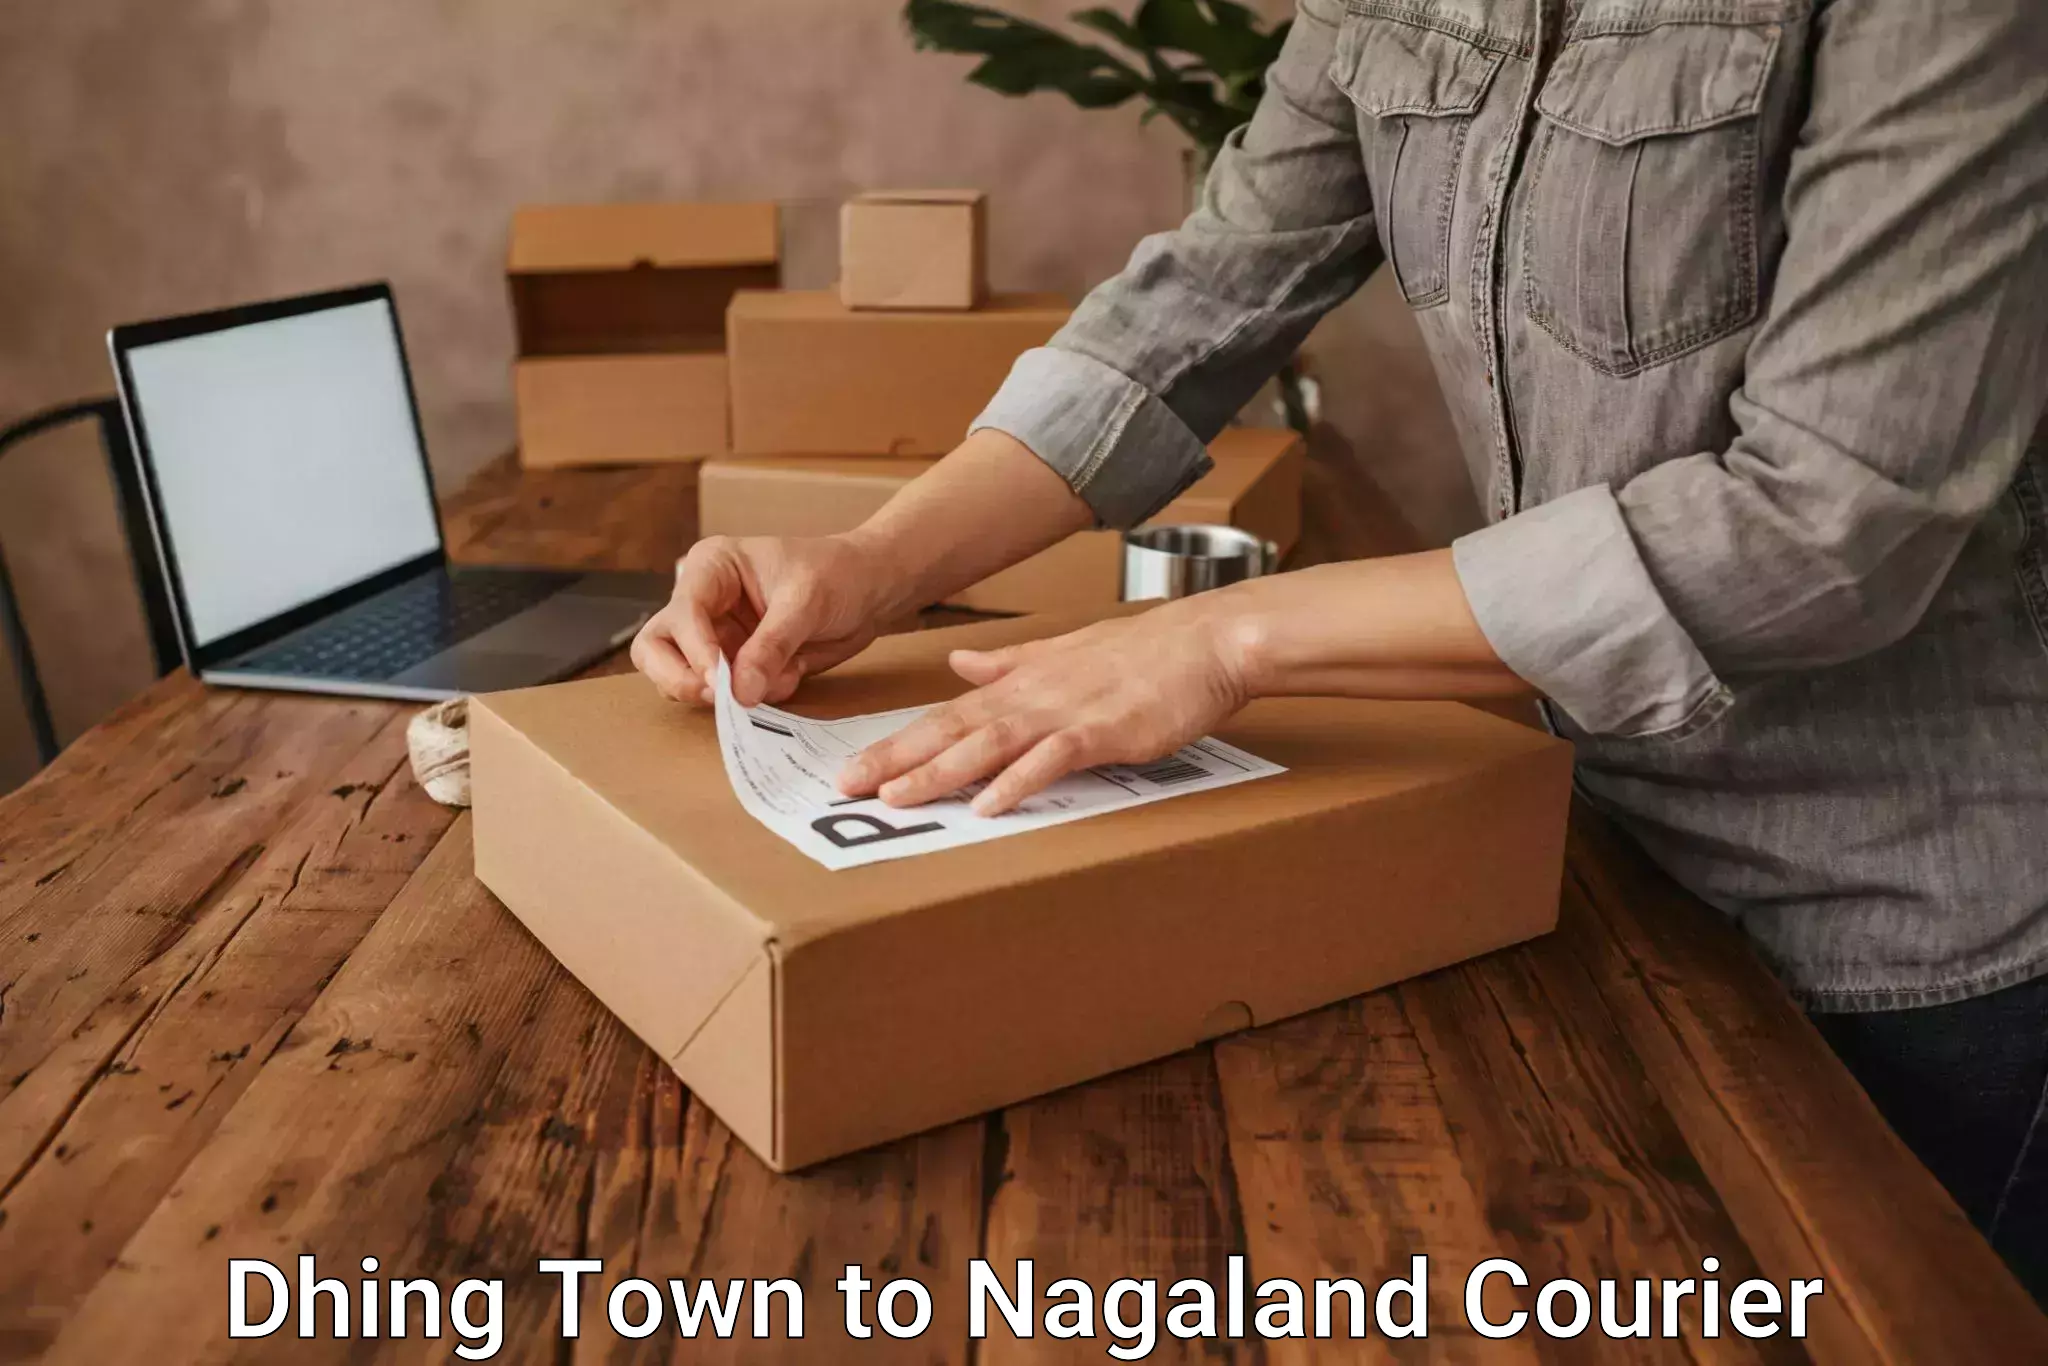 24-hour courier service Dhing Town to Nagaland